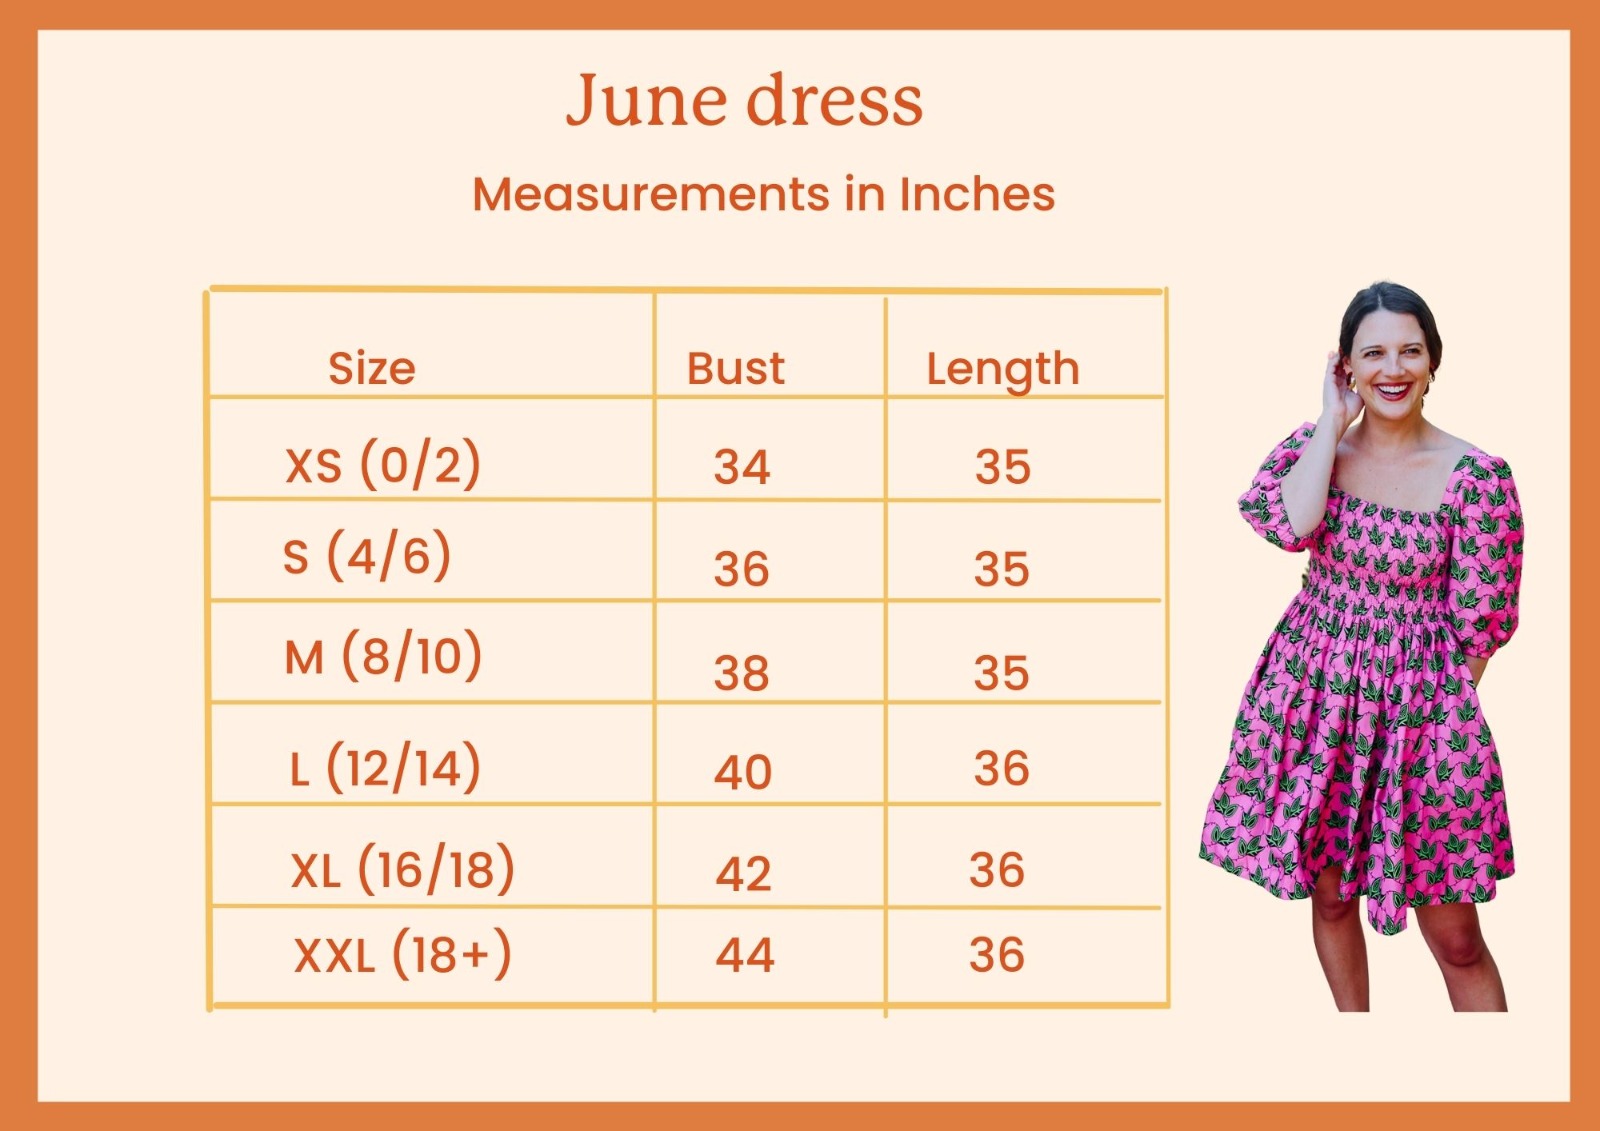 June dress collab with Elisamama